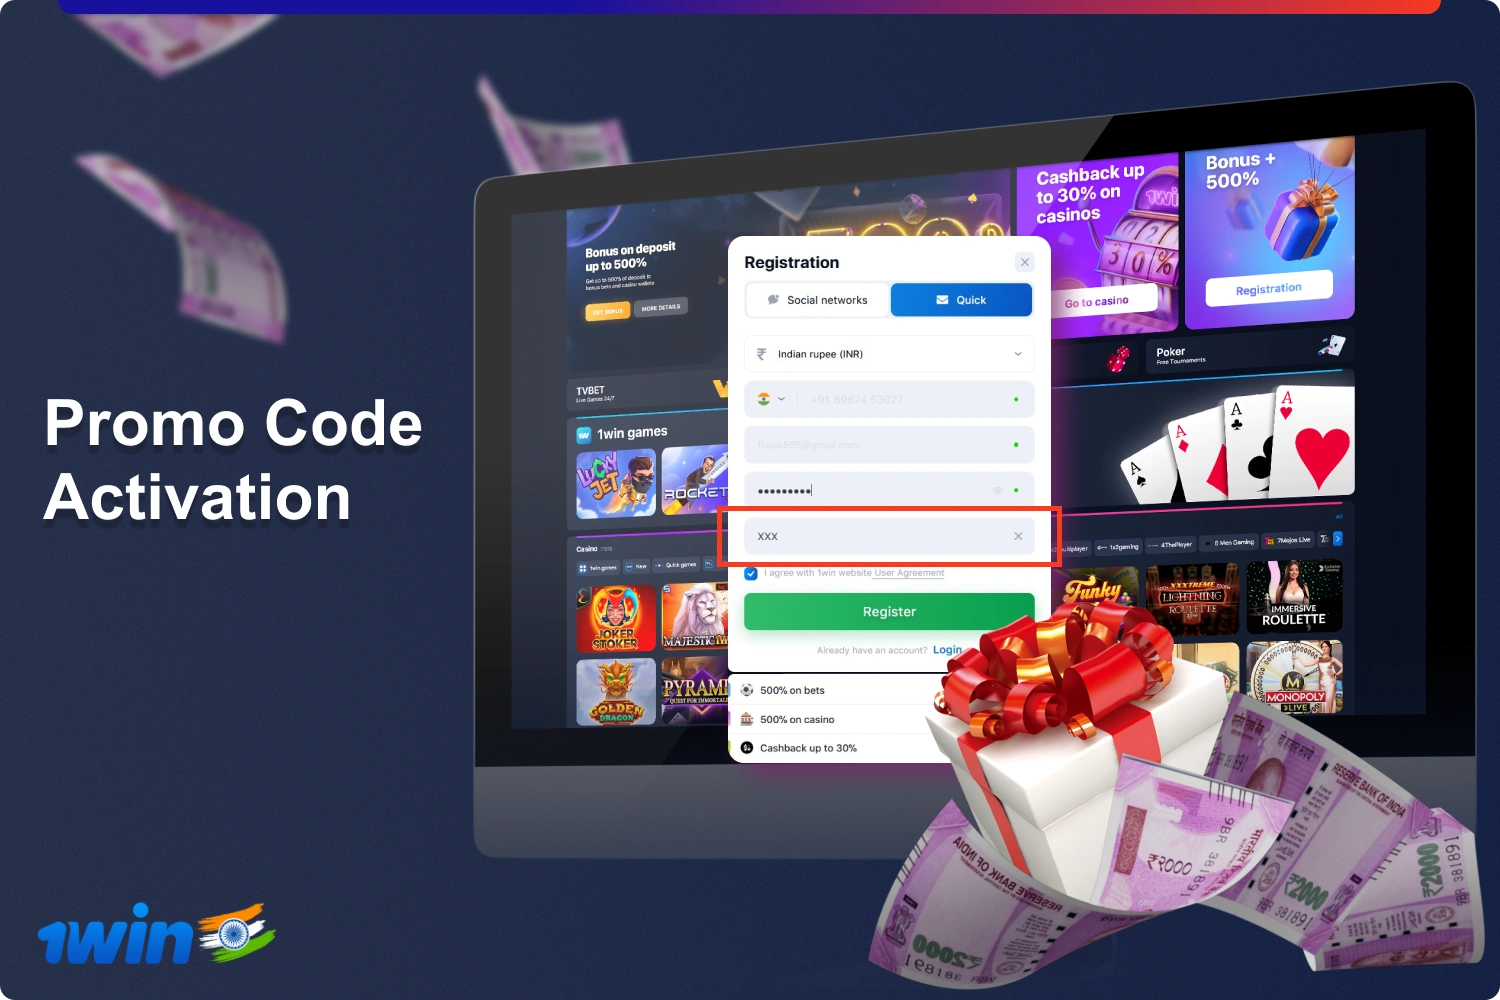 Players from India can use the bonus code 1win to activate promotions